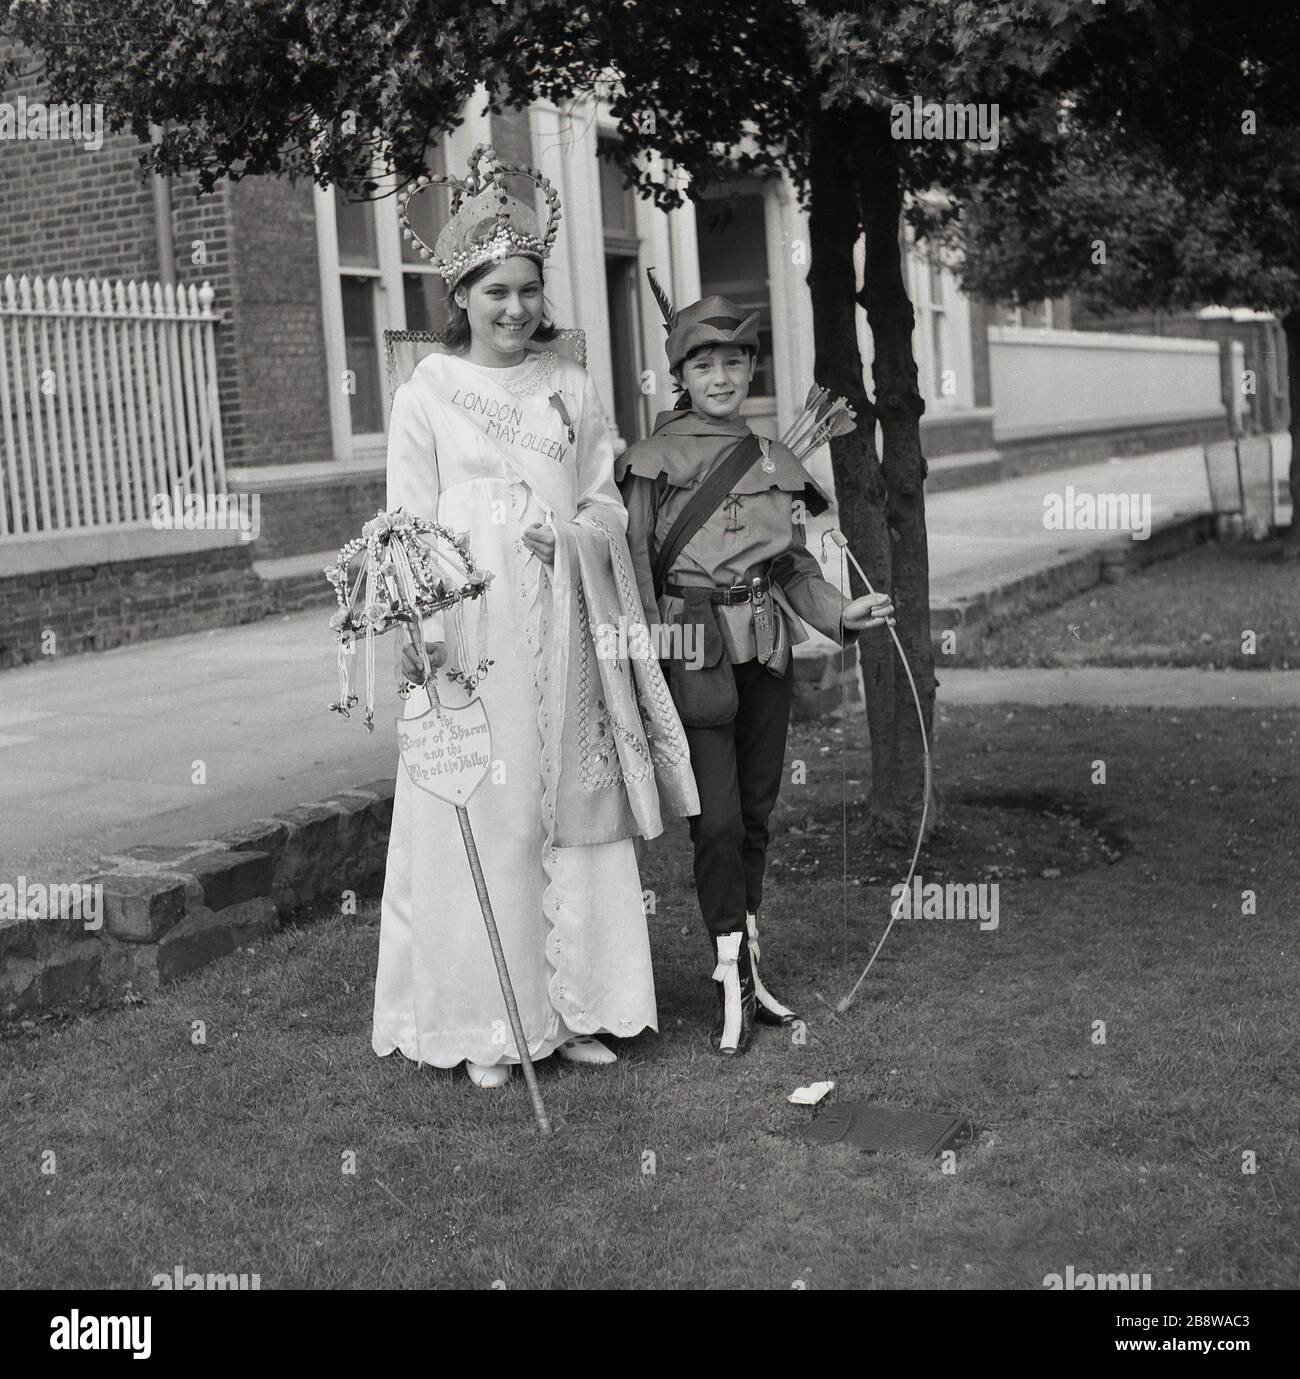 1960s, historical,a young teenage girl, newly crowned as the London May Queen in gown and tiara, standing beside a young girl in a costume holding a bow and arrow, Lewisham, South East London, England, UK. Stock Photo